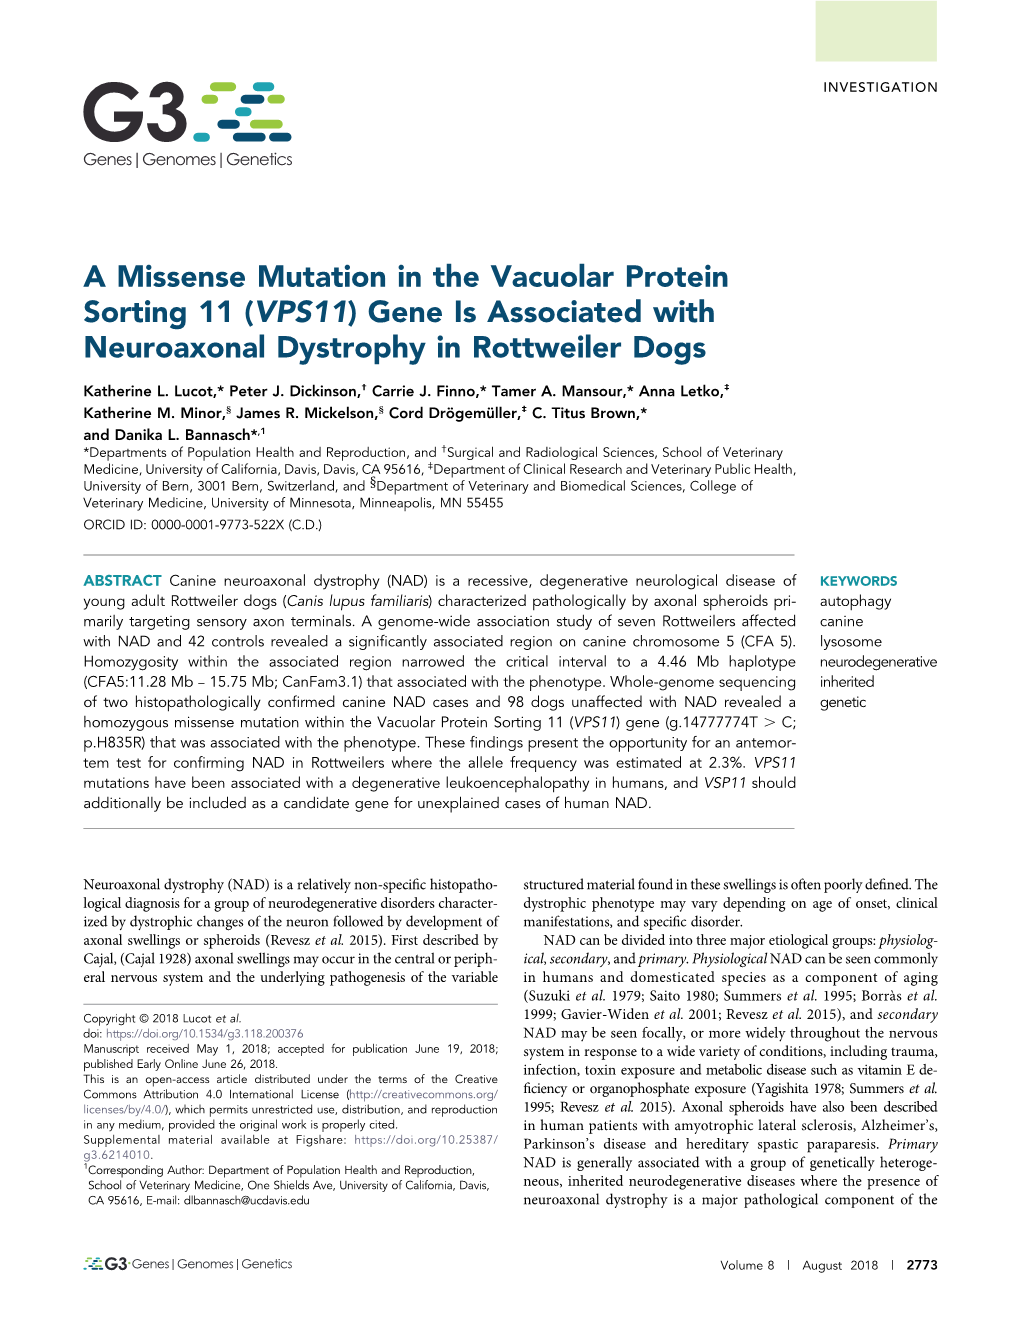 A Missense Mutation in the Vacuolar Protein Sorting 11 (VPS11) Gene Is Associated with Neuroaxonal Dystrophy in Rottweiler Dogs